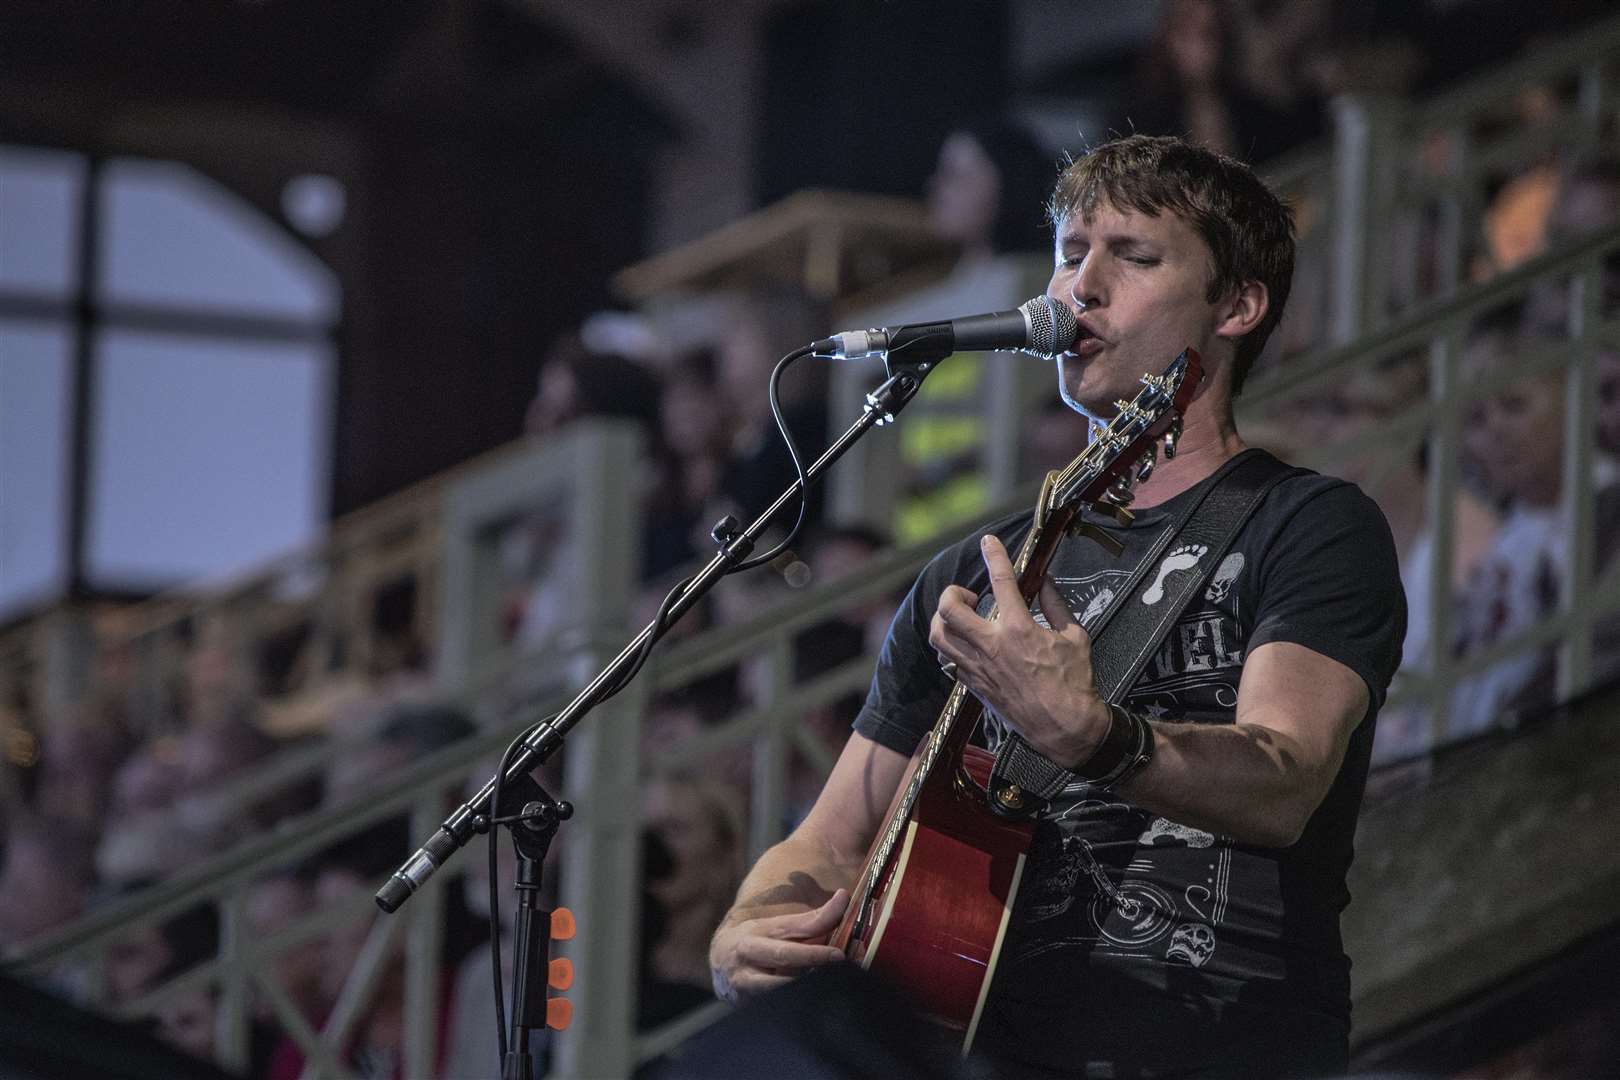 James Blunt will perform at this year's Pub in the Park